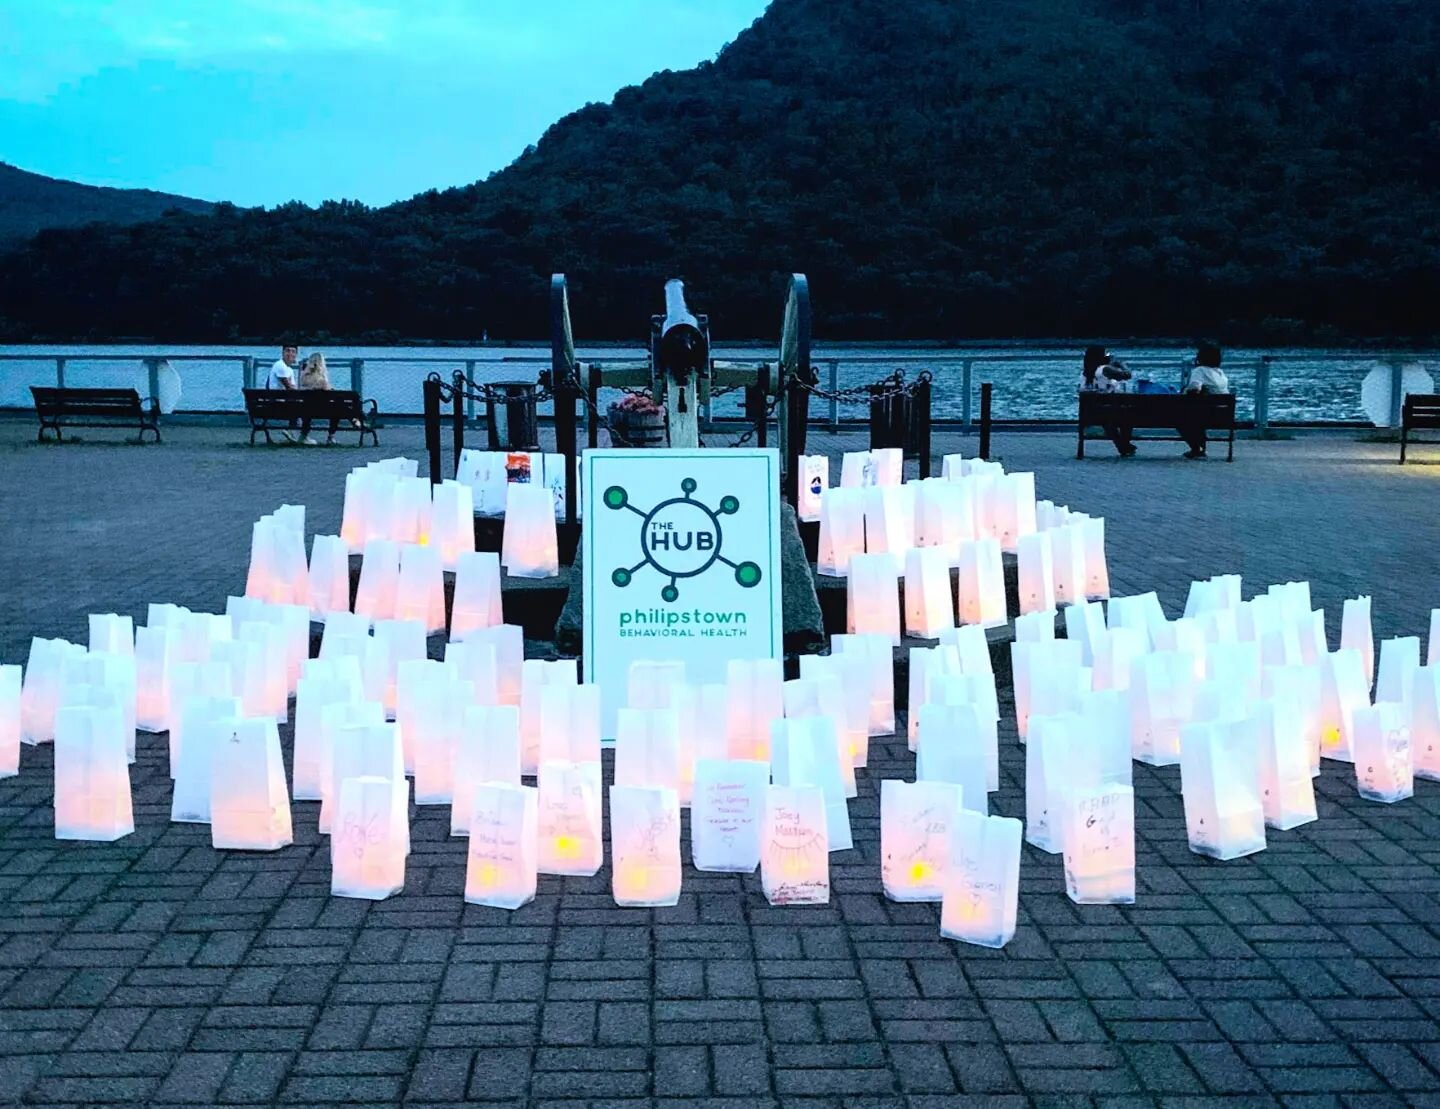 Hub Luminaria, today starting at 6:30 pm at the Cold Spring waterfront. In honor of #overdoseawareness - remembering without stigma those lost to overdose.

This event is free and open to all.

An emotional support dog offering unconditional love fro